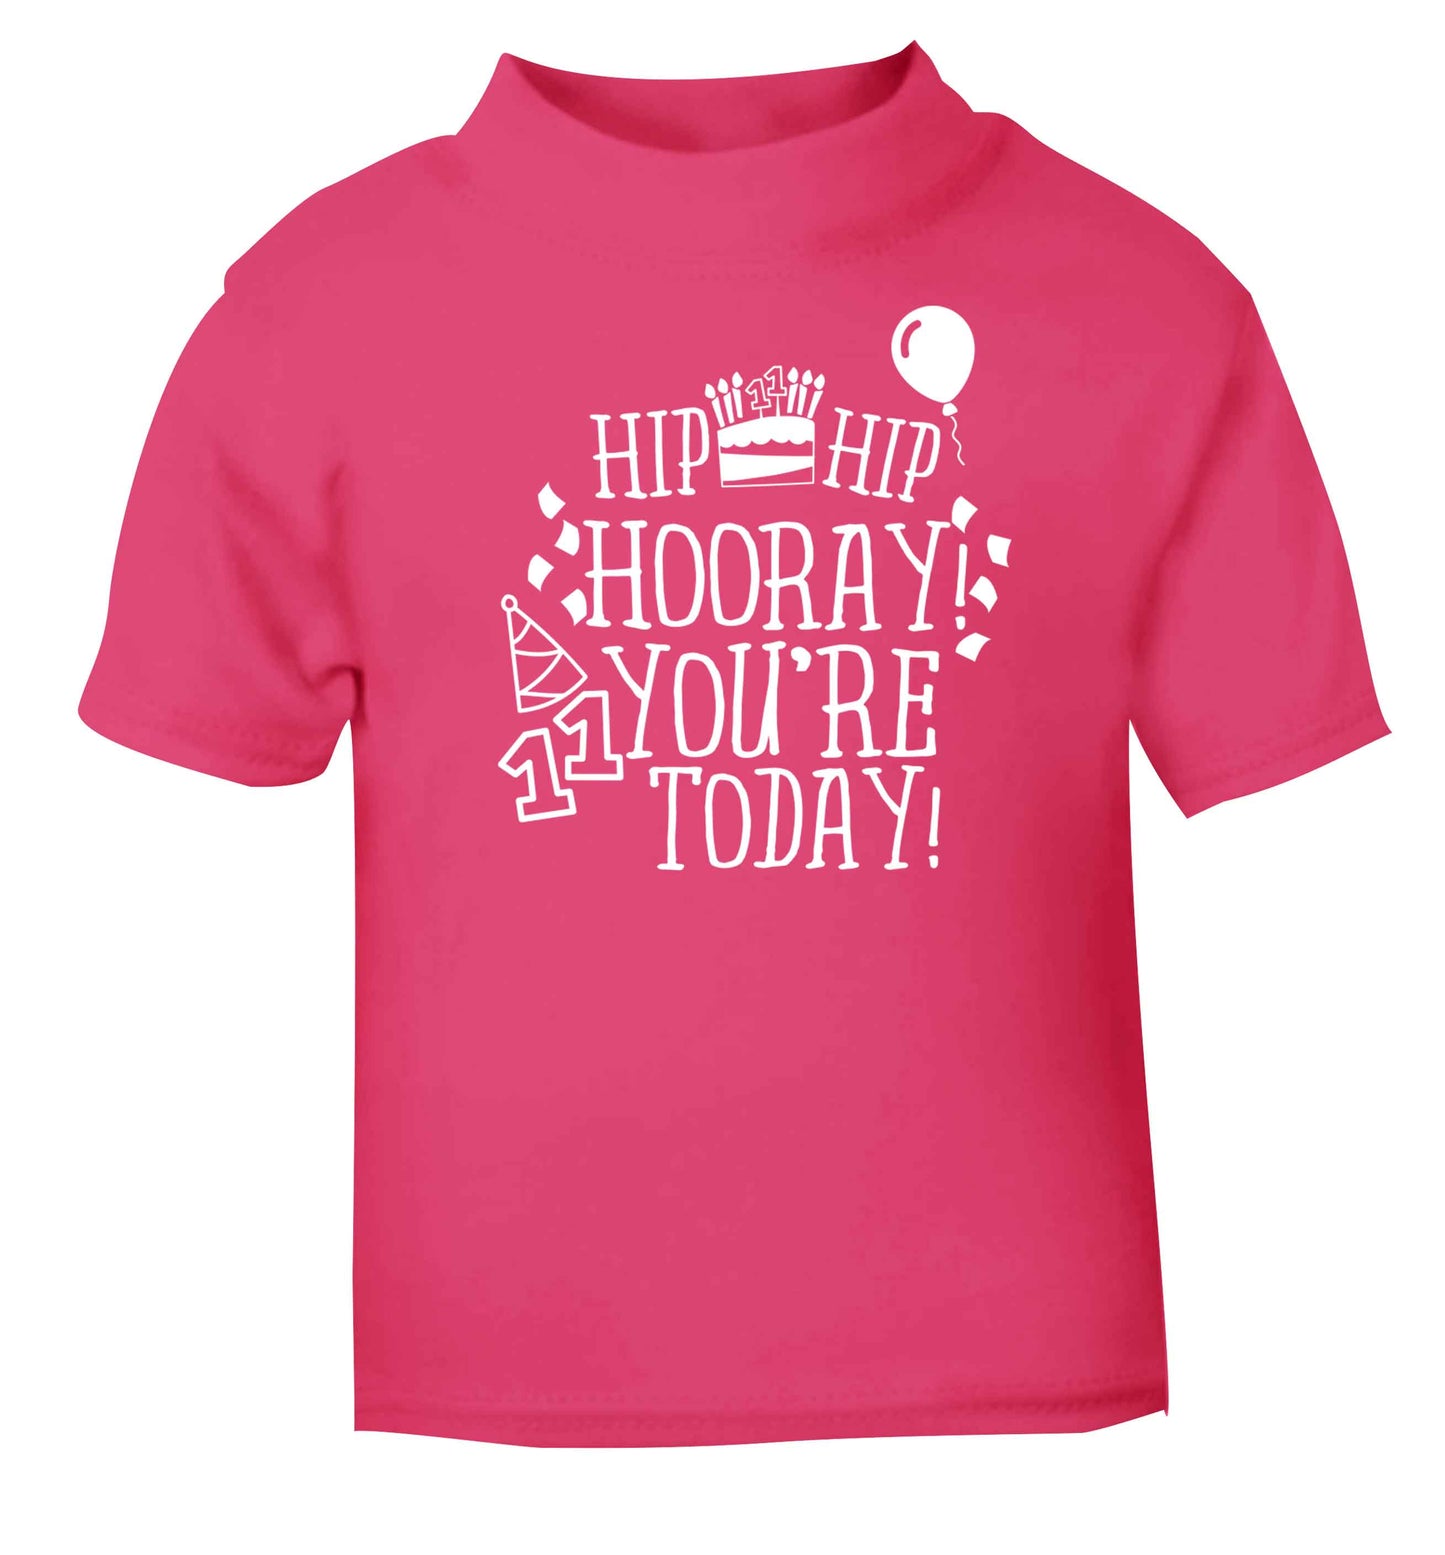 Hip hip hooray I you're eleven today! pink baby toddler Tshirt 2 Years